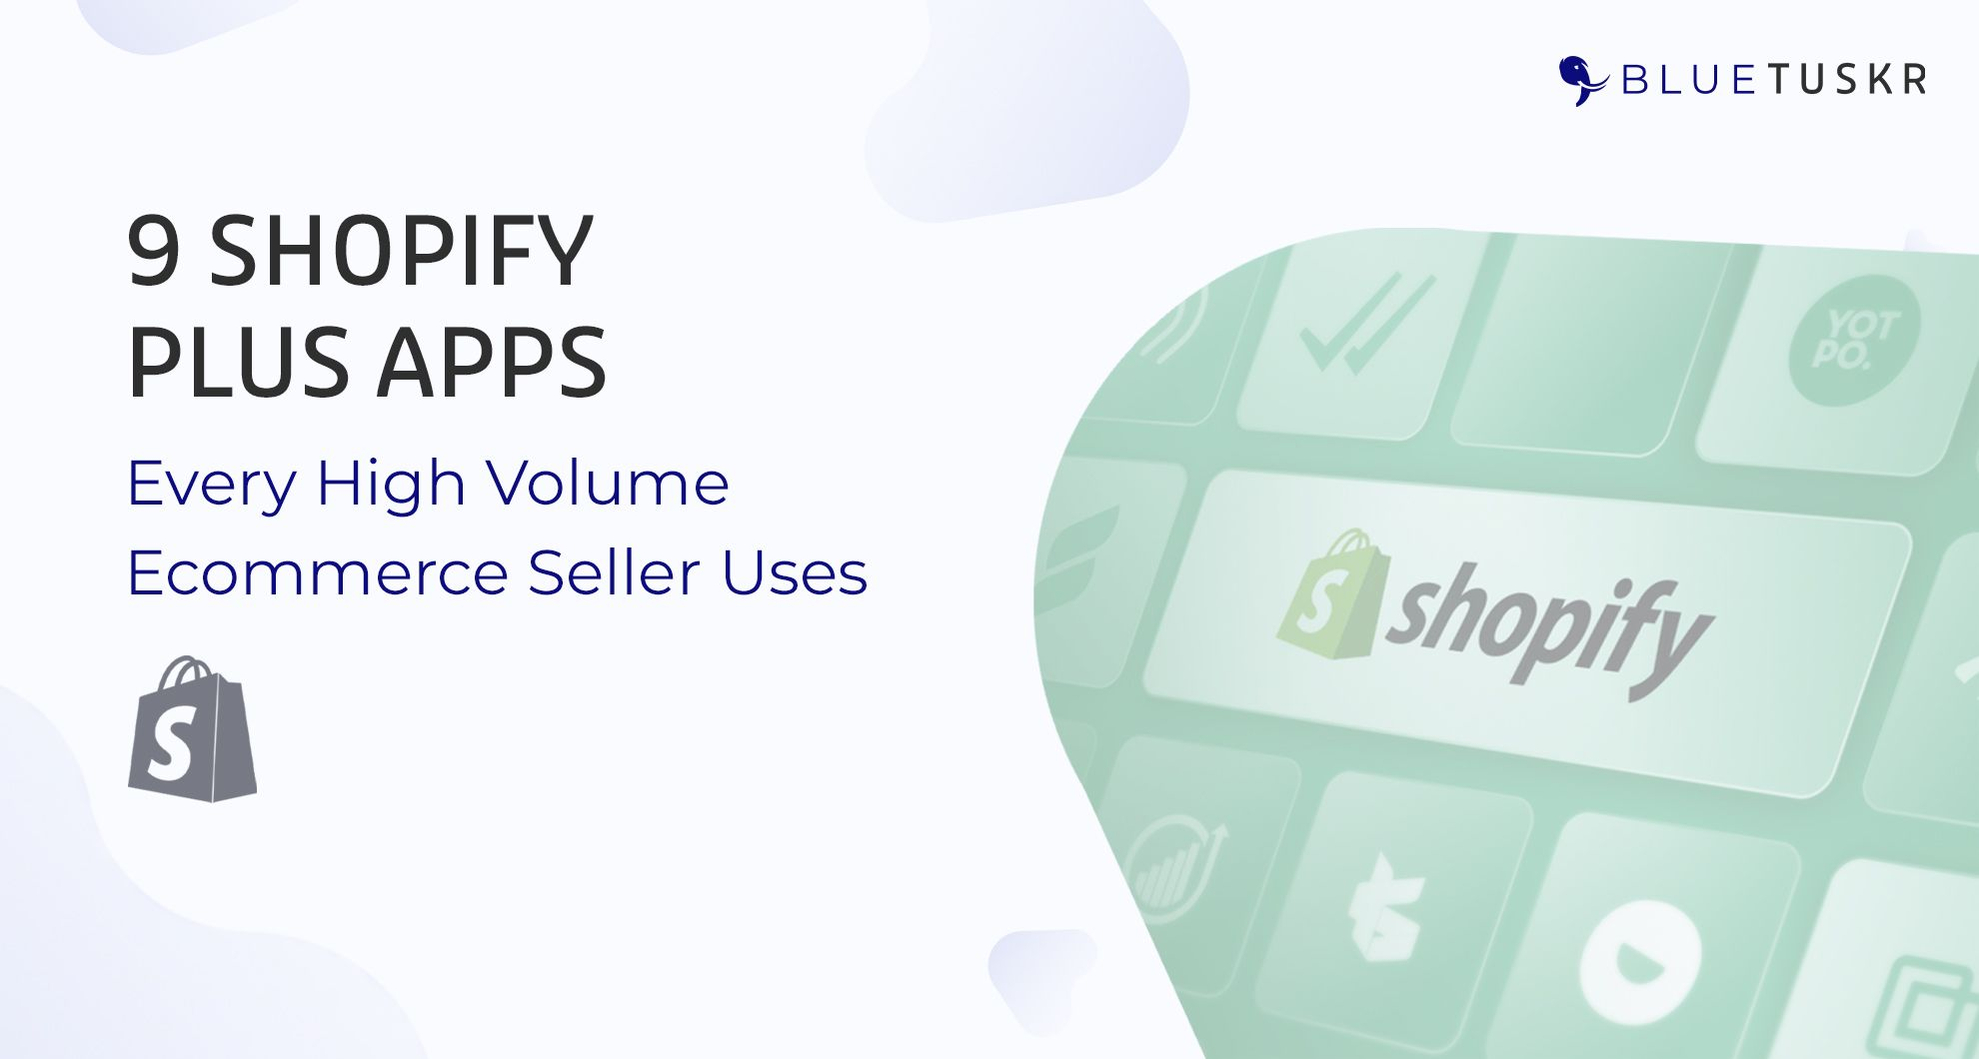 9 Shopify Plus Apps Every High Volume Ecommerce Seller Uses